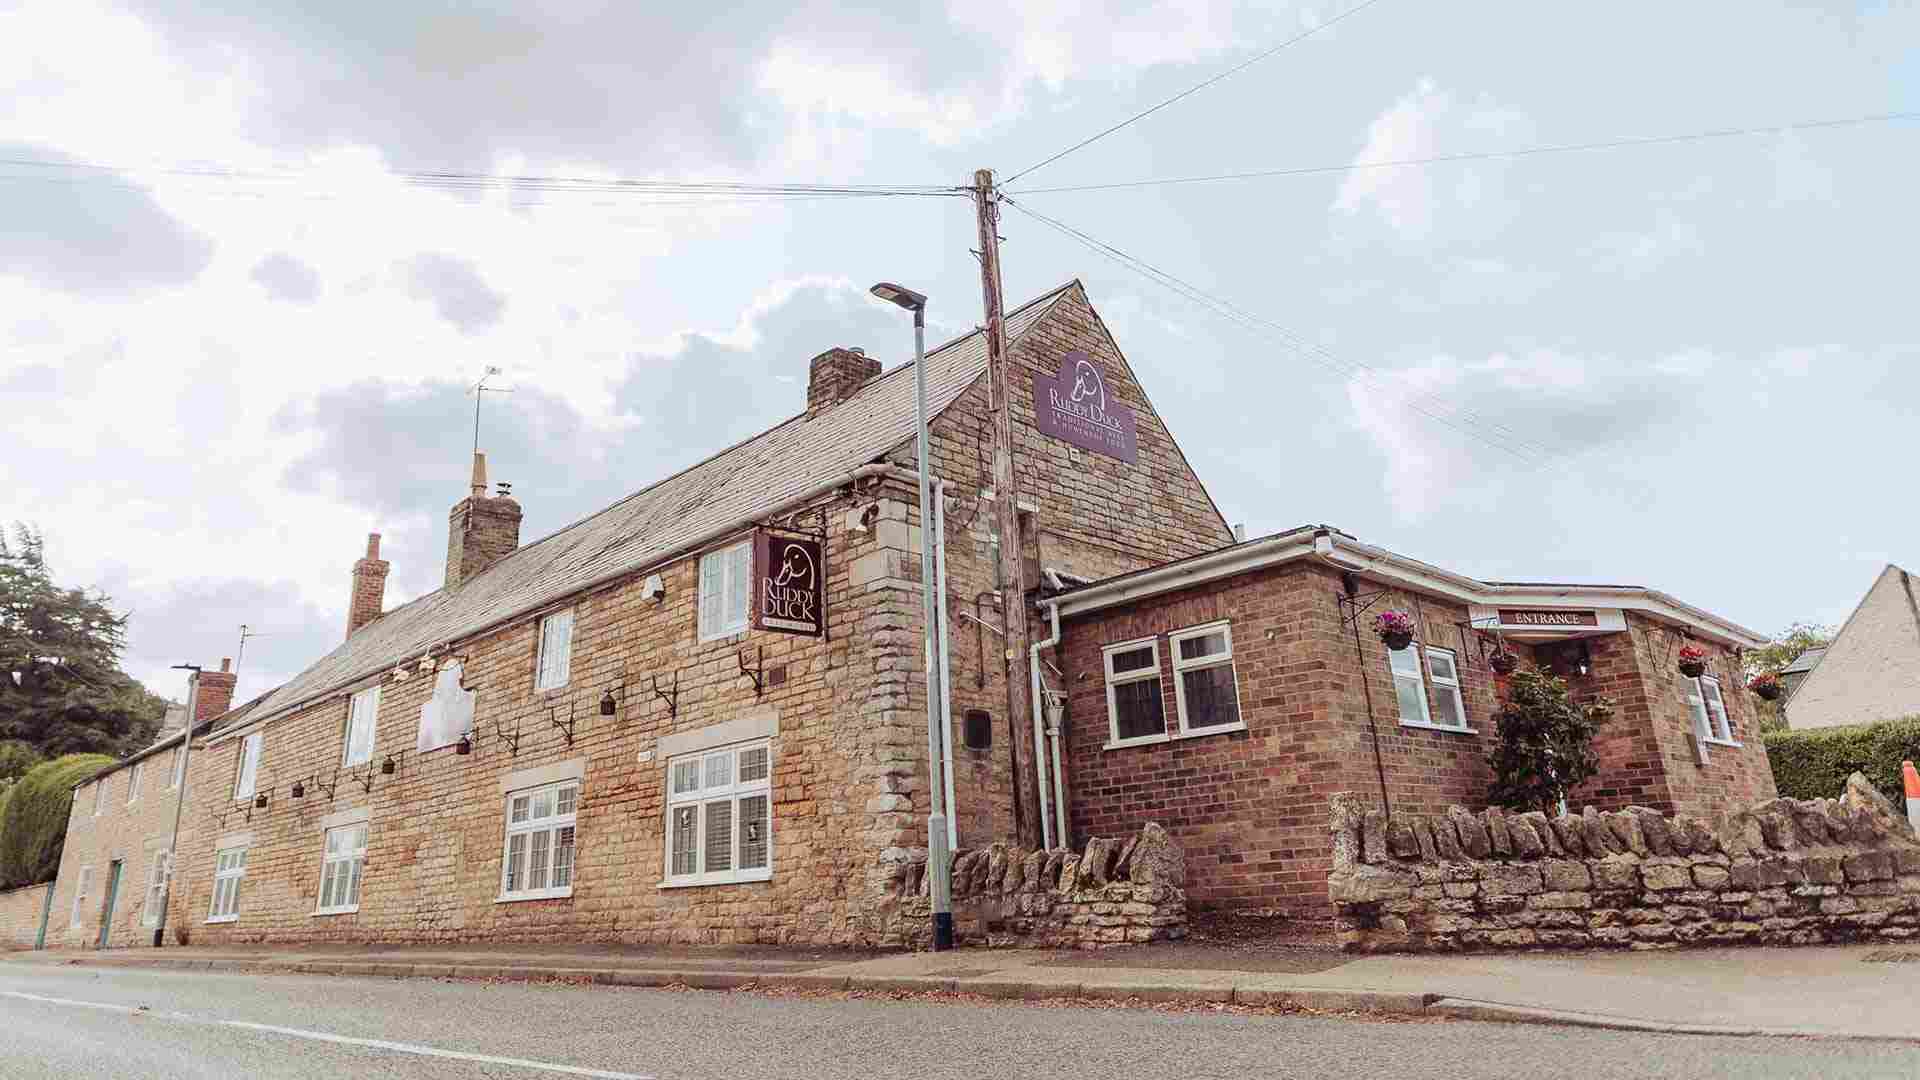 Ruddy Duck, Peakirk - A wide angled view of the pub from outside